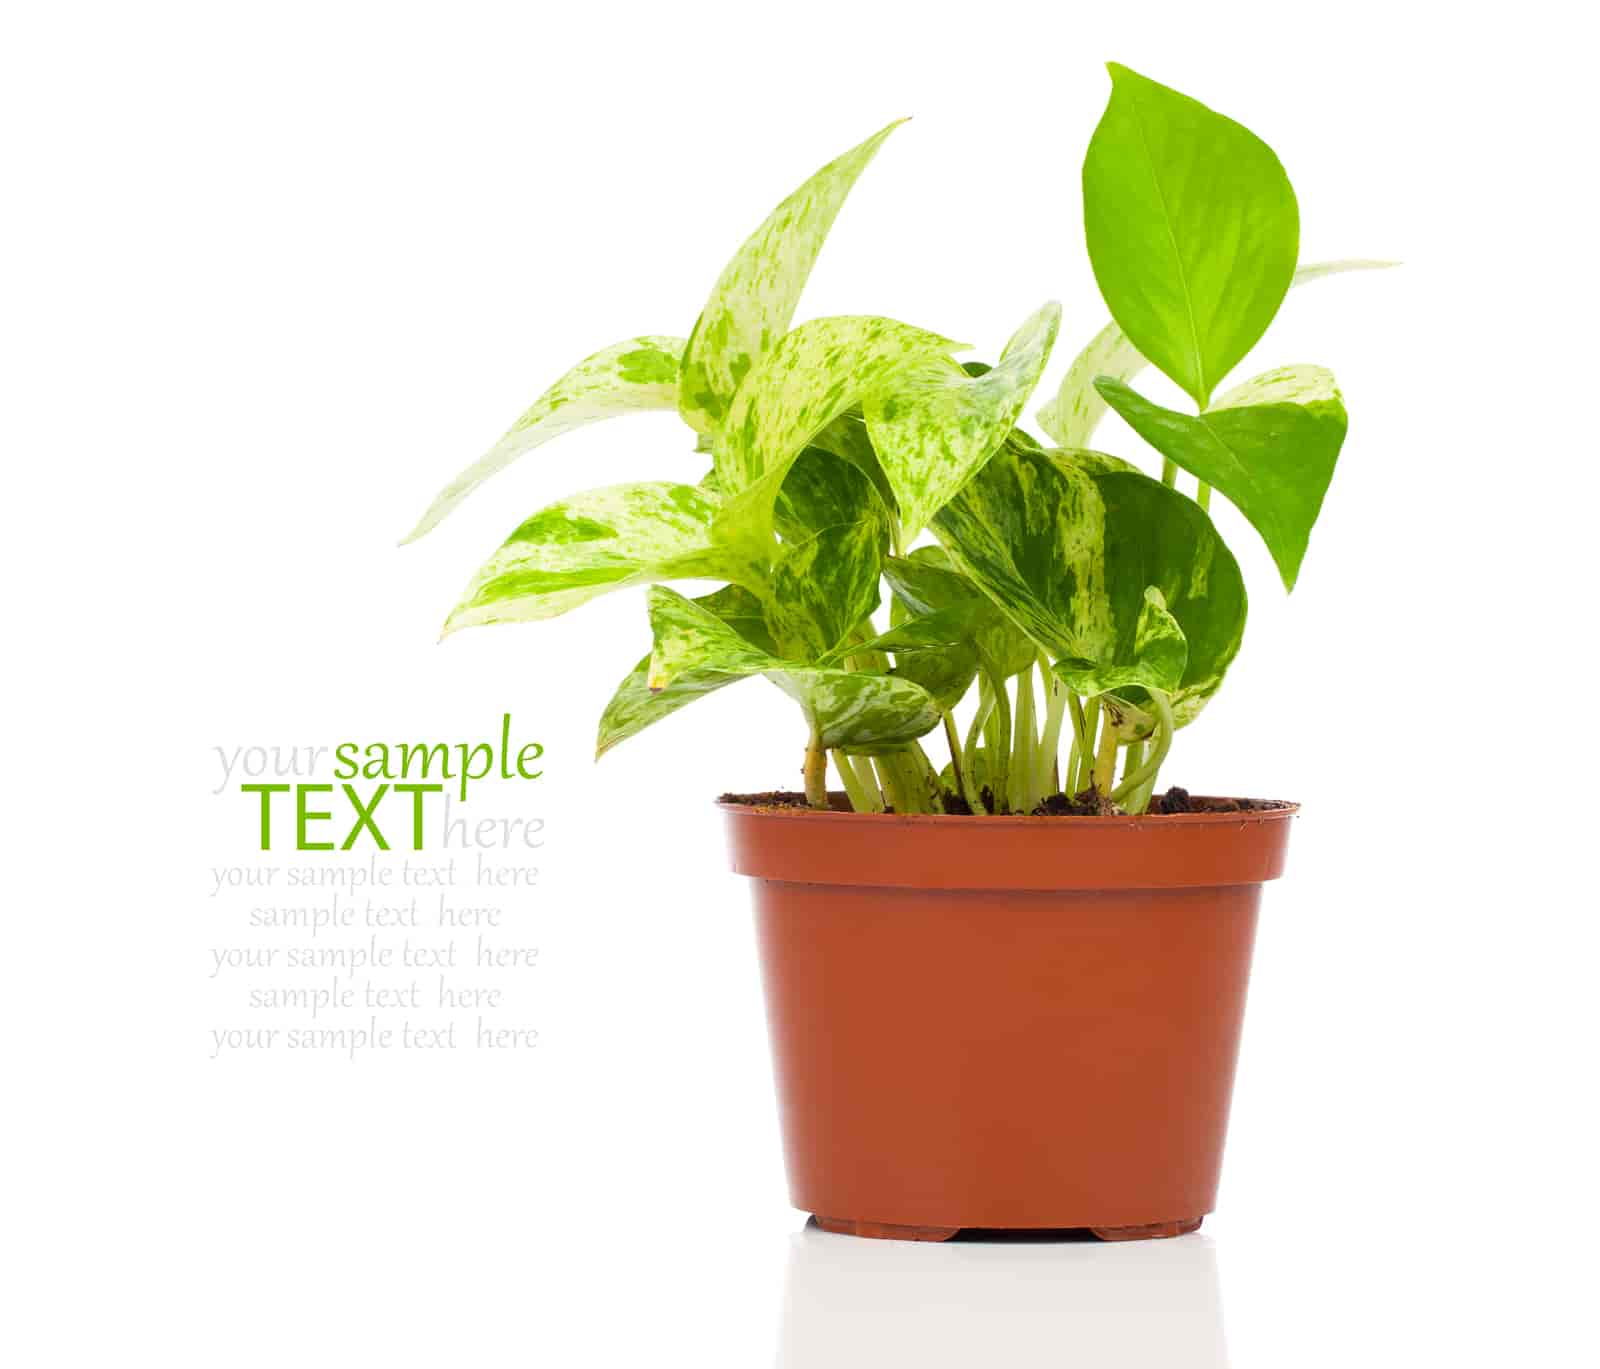 Marble Queen Pothos Benefits : [ Know All Here ]